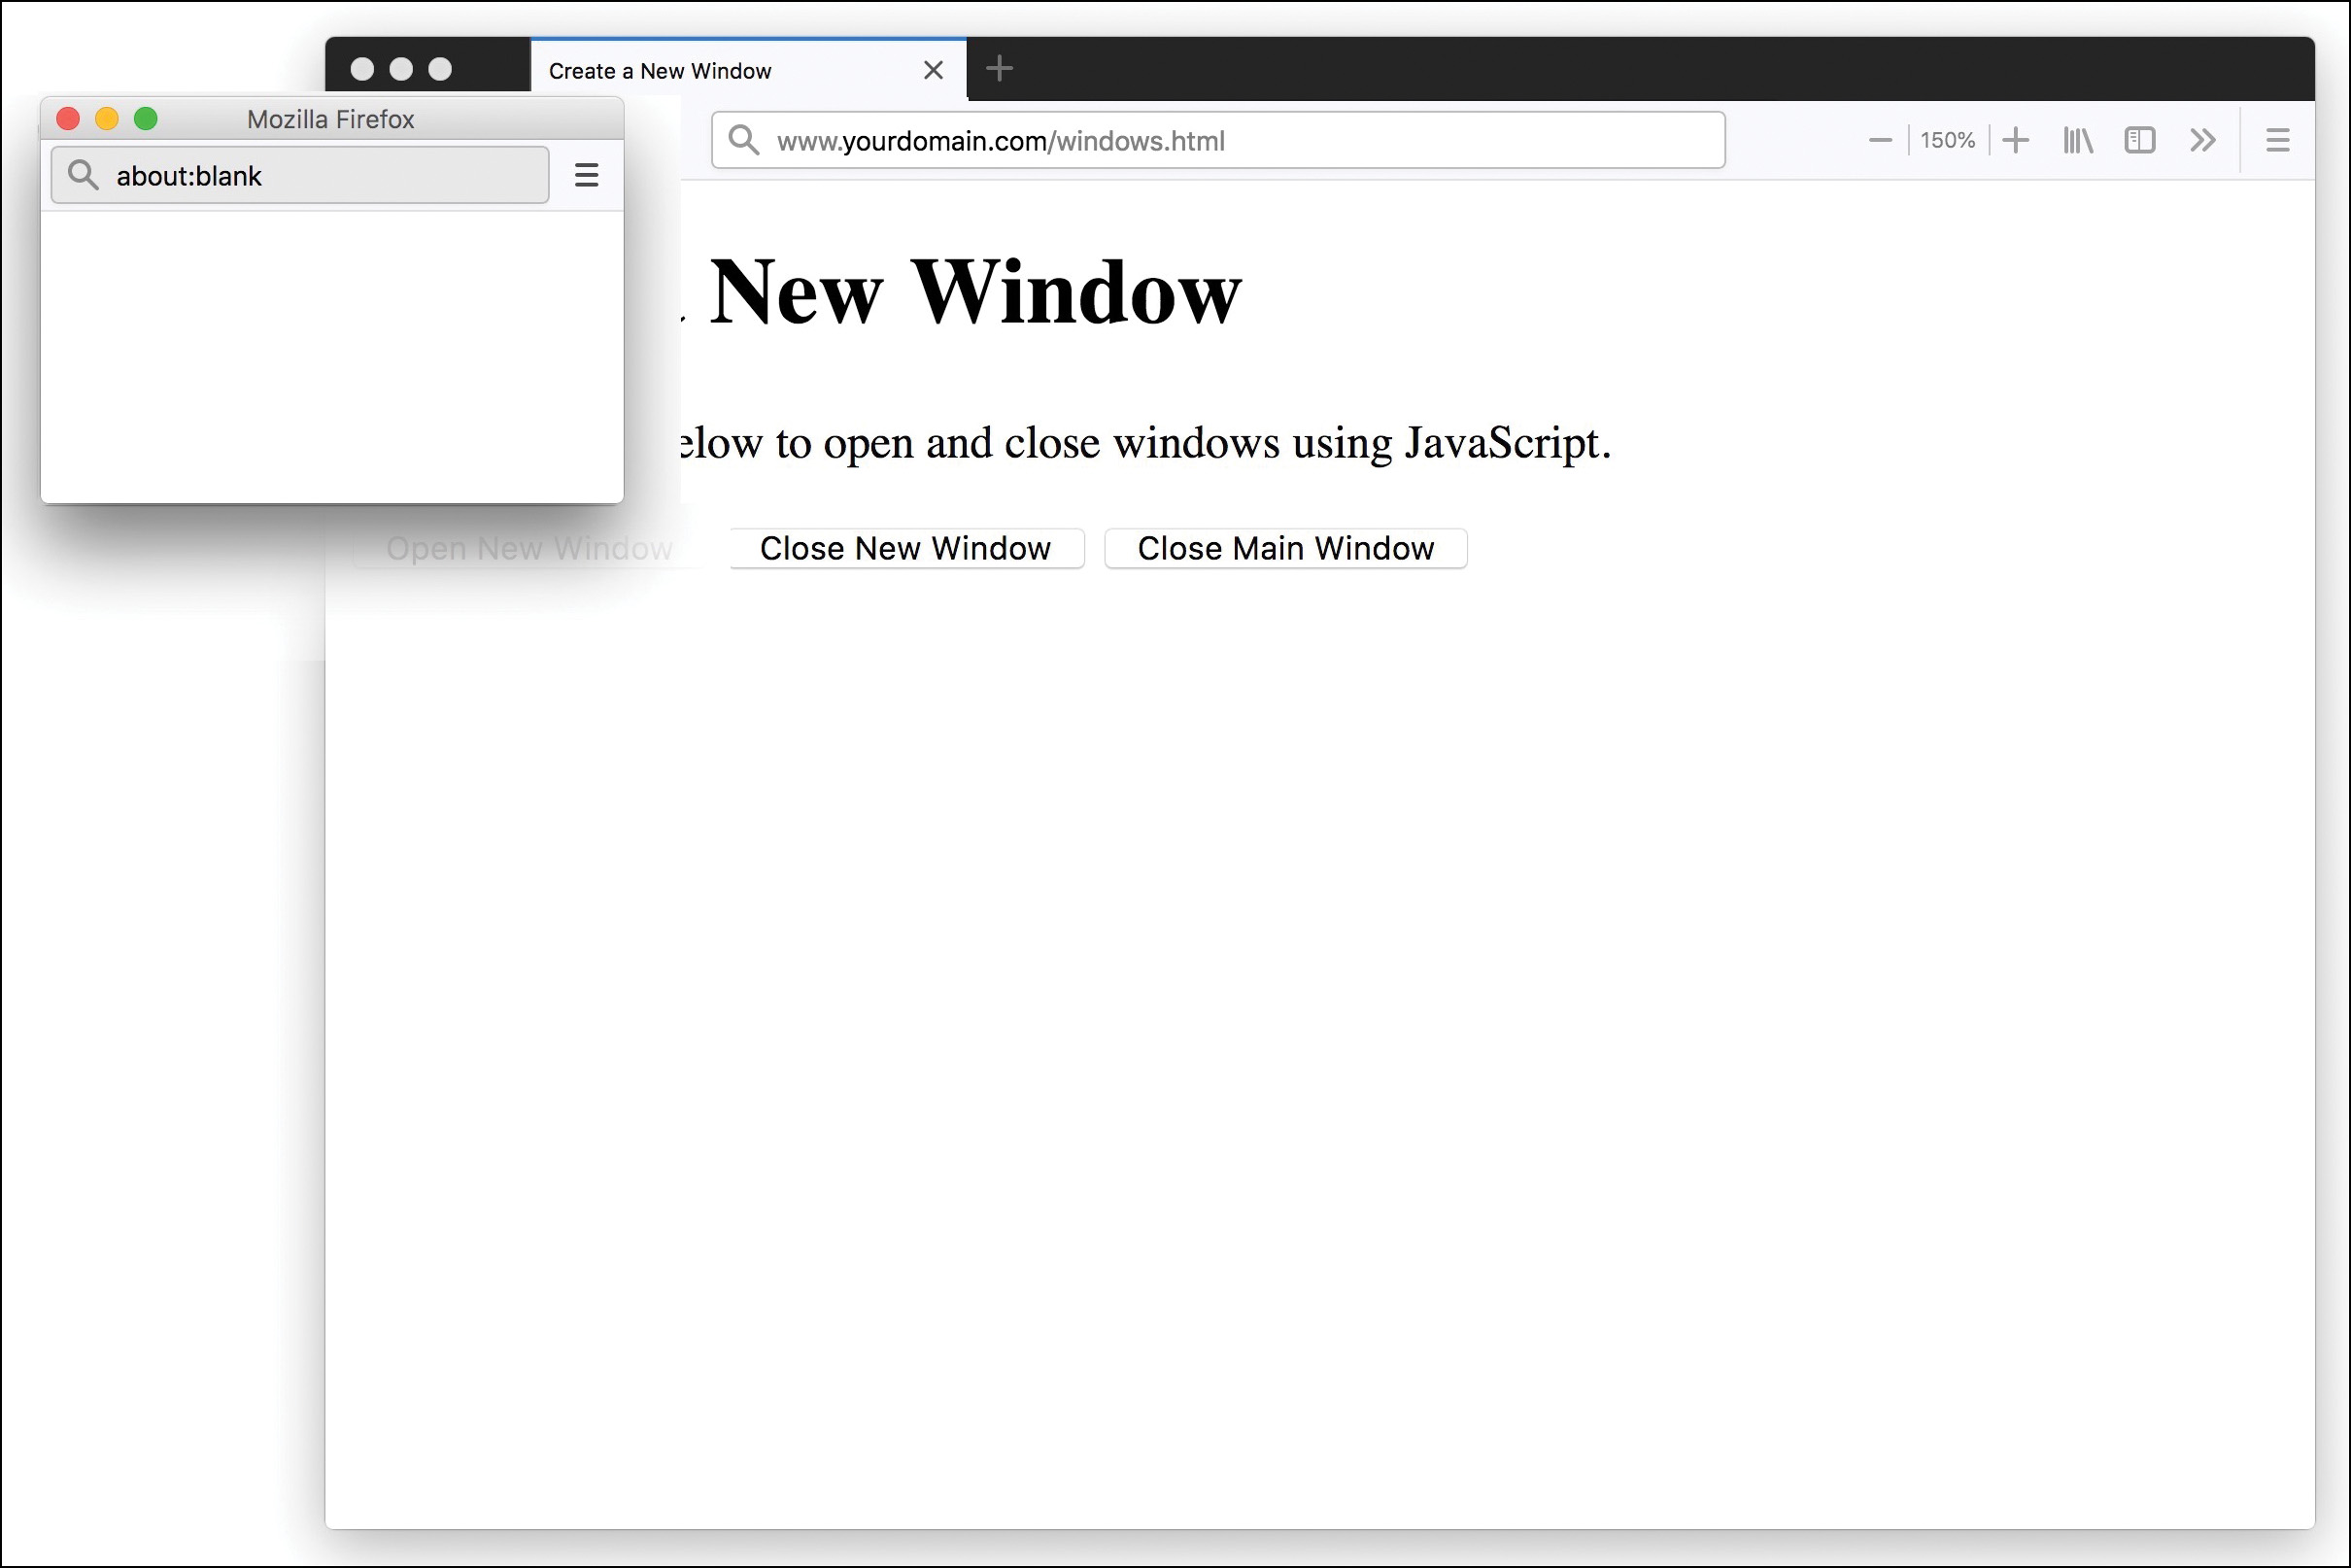 A screenshot illustrates the action of opening a new browser window by clicking a button in another window.